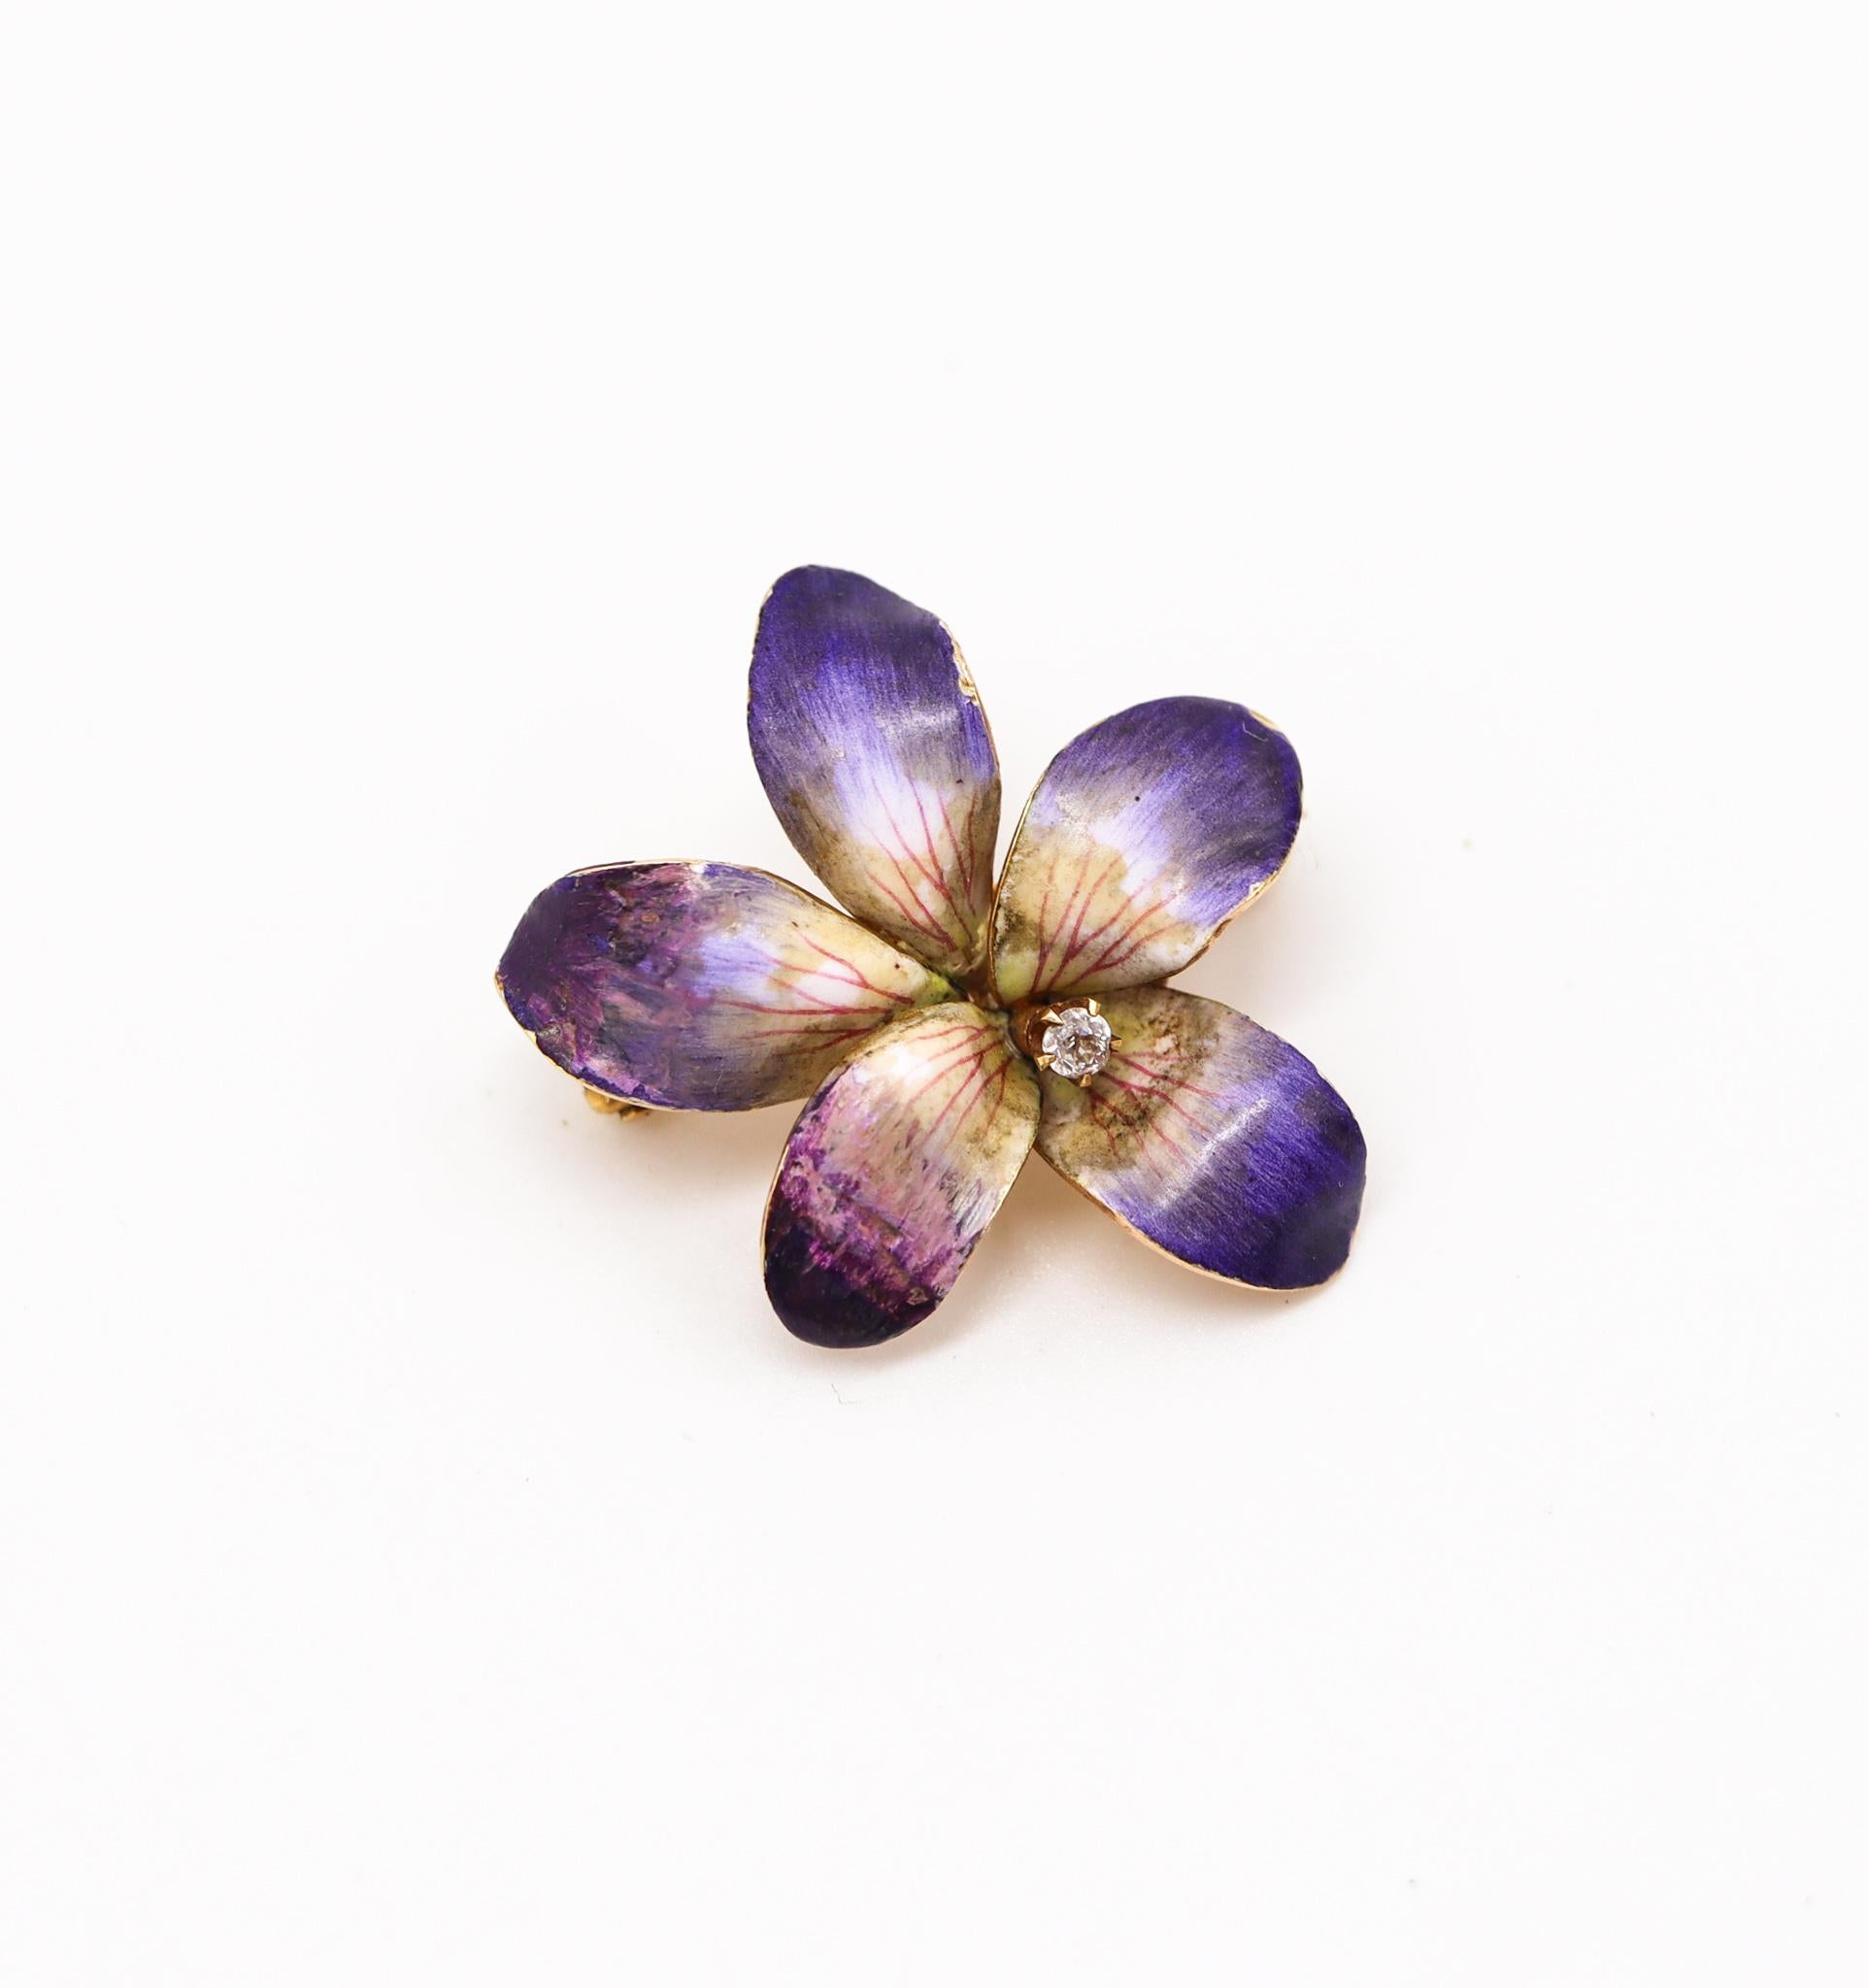 Edwardian Enameled flower pin created by Krementz & Co.

Beautiful colorful piece, created in New Jersey United States during the Edwardian and the Art Nouveau periods, back in the 1900-1910. This beautiful orchid flower pin brooch has been